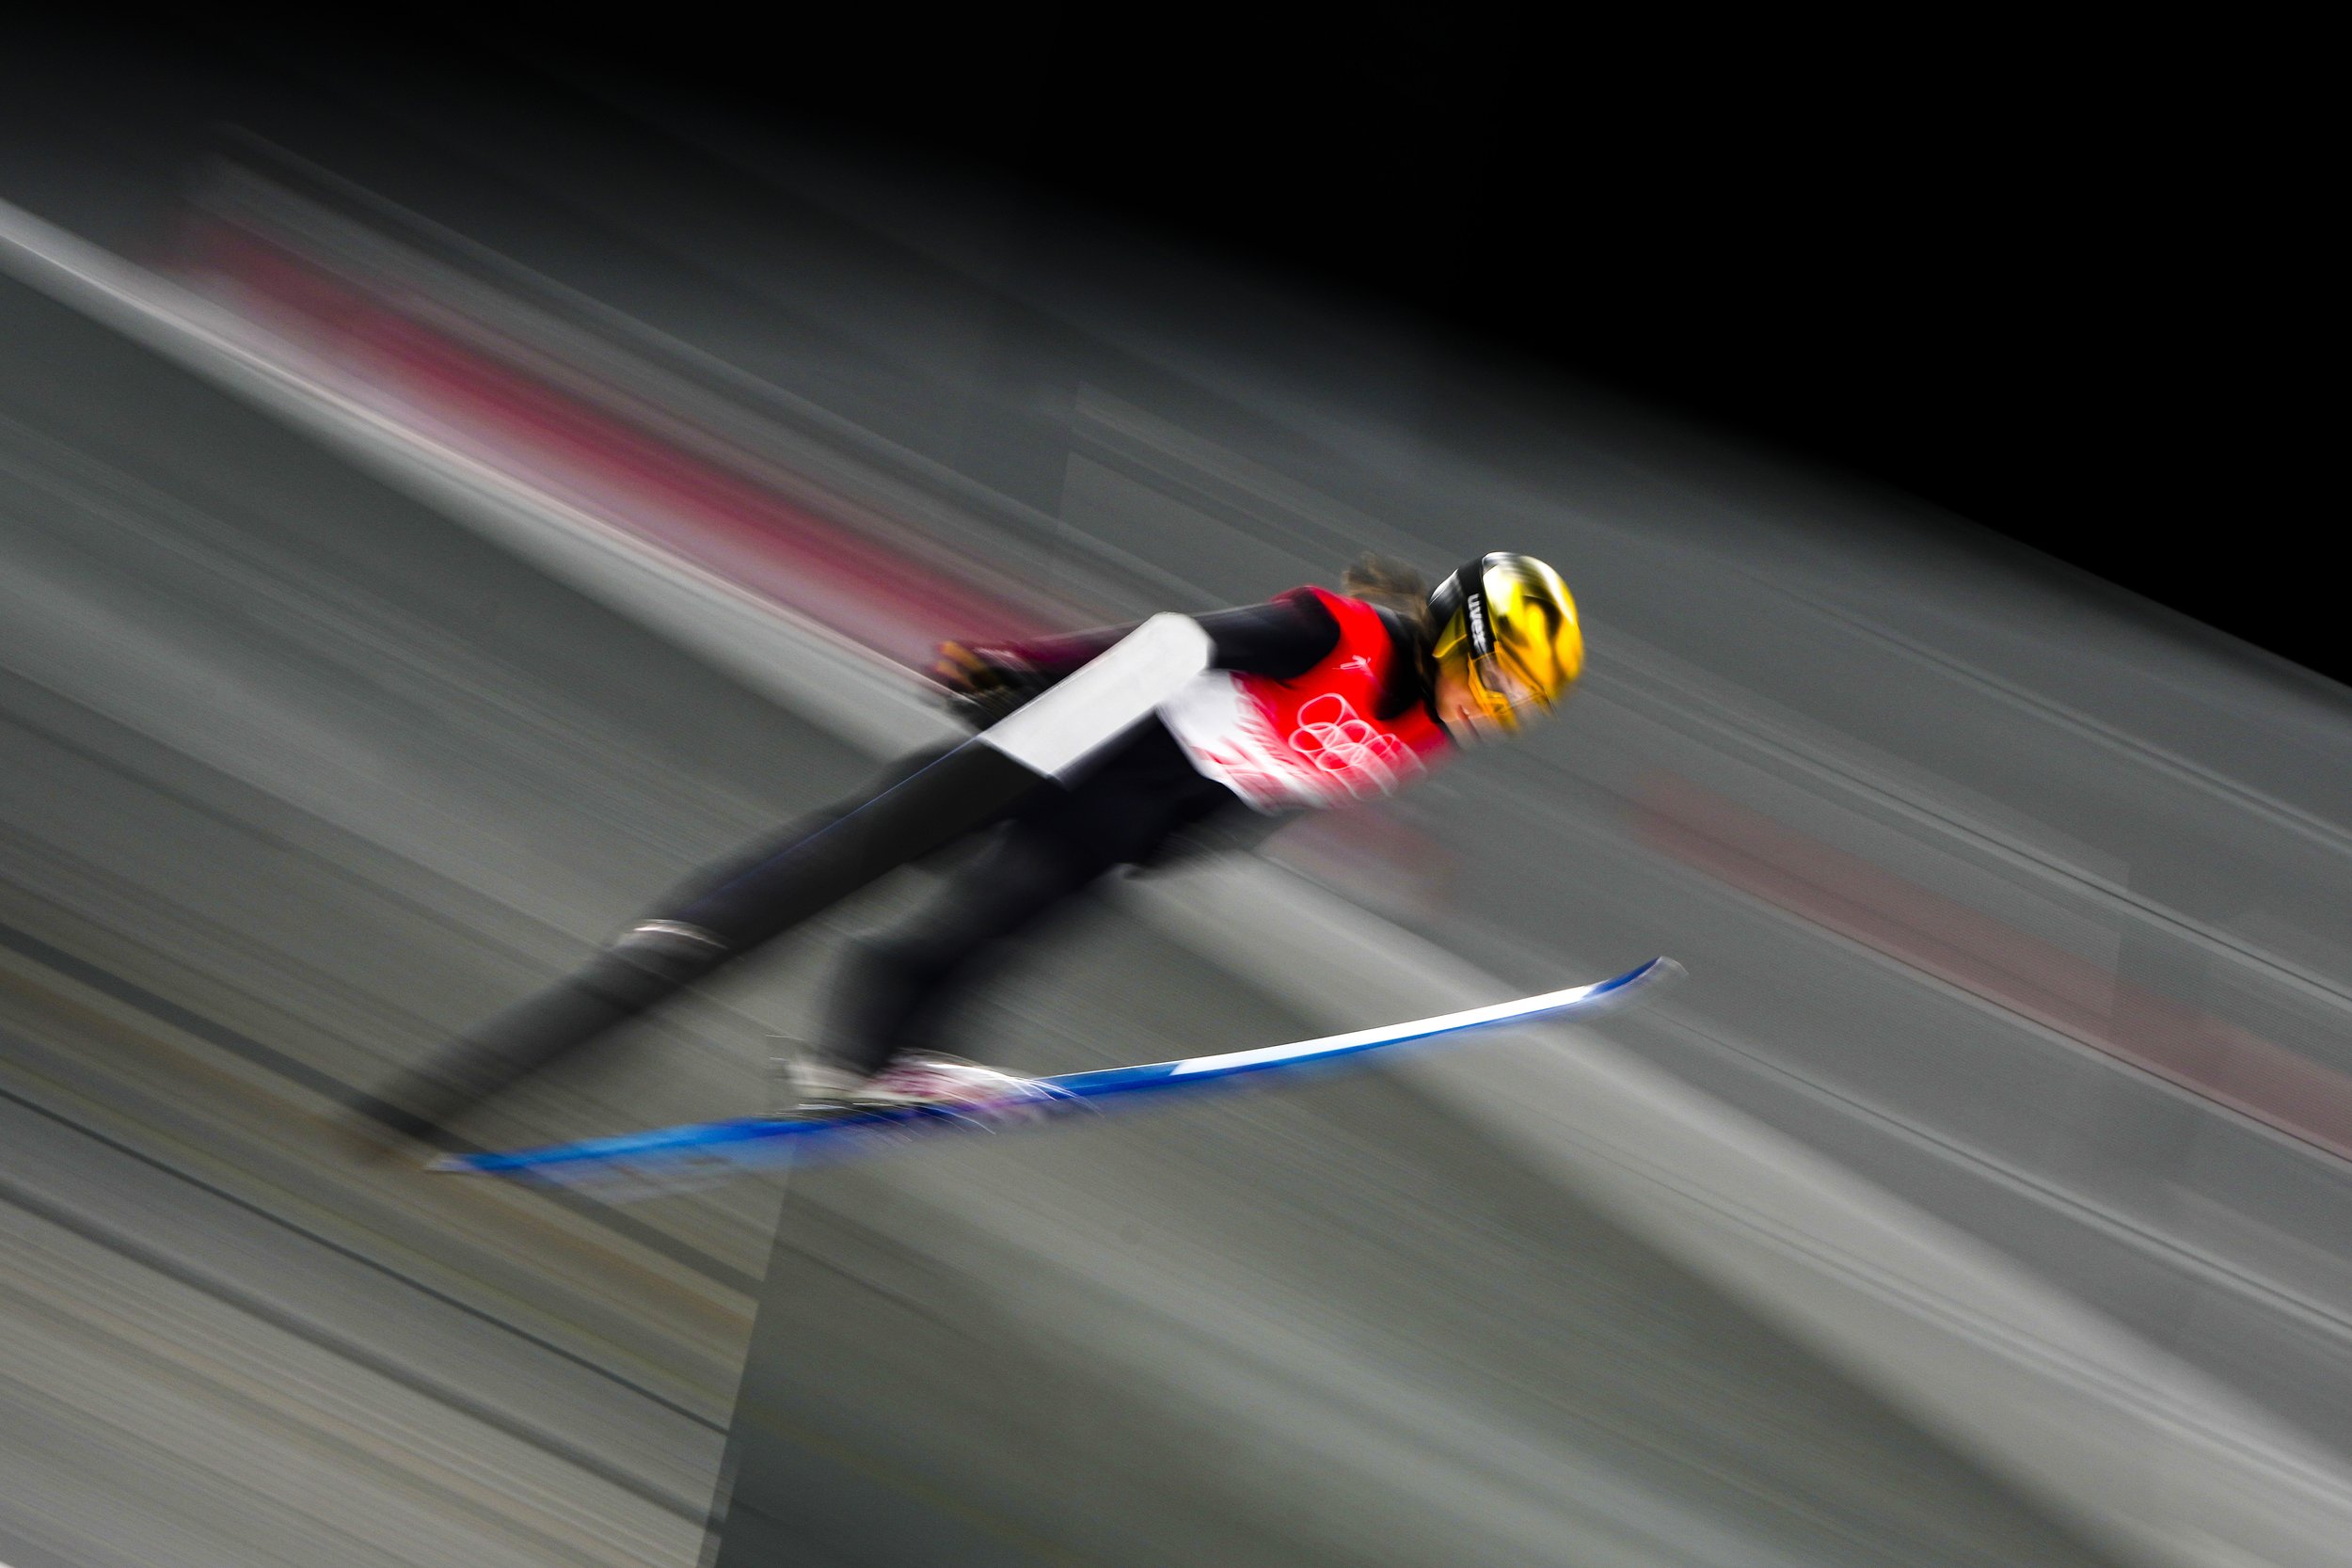  Juliane Seyfarth, of Germany, soars through the air during the women's normal hill individual first round at the 2022 Winter Olympics, Saturday, Feb. 5, 2022, in Zhangjiakou, China. (AP Photo/Matthias Schrader) 